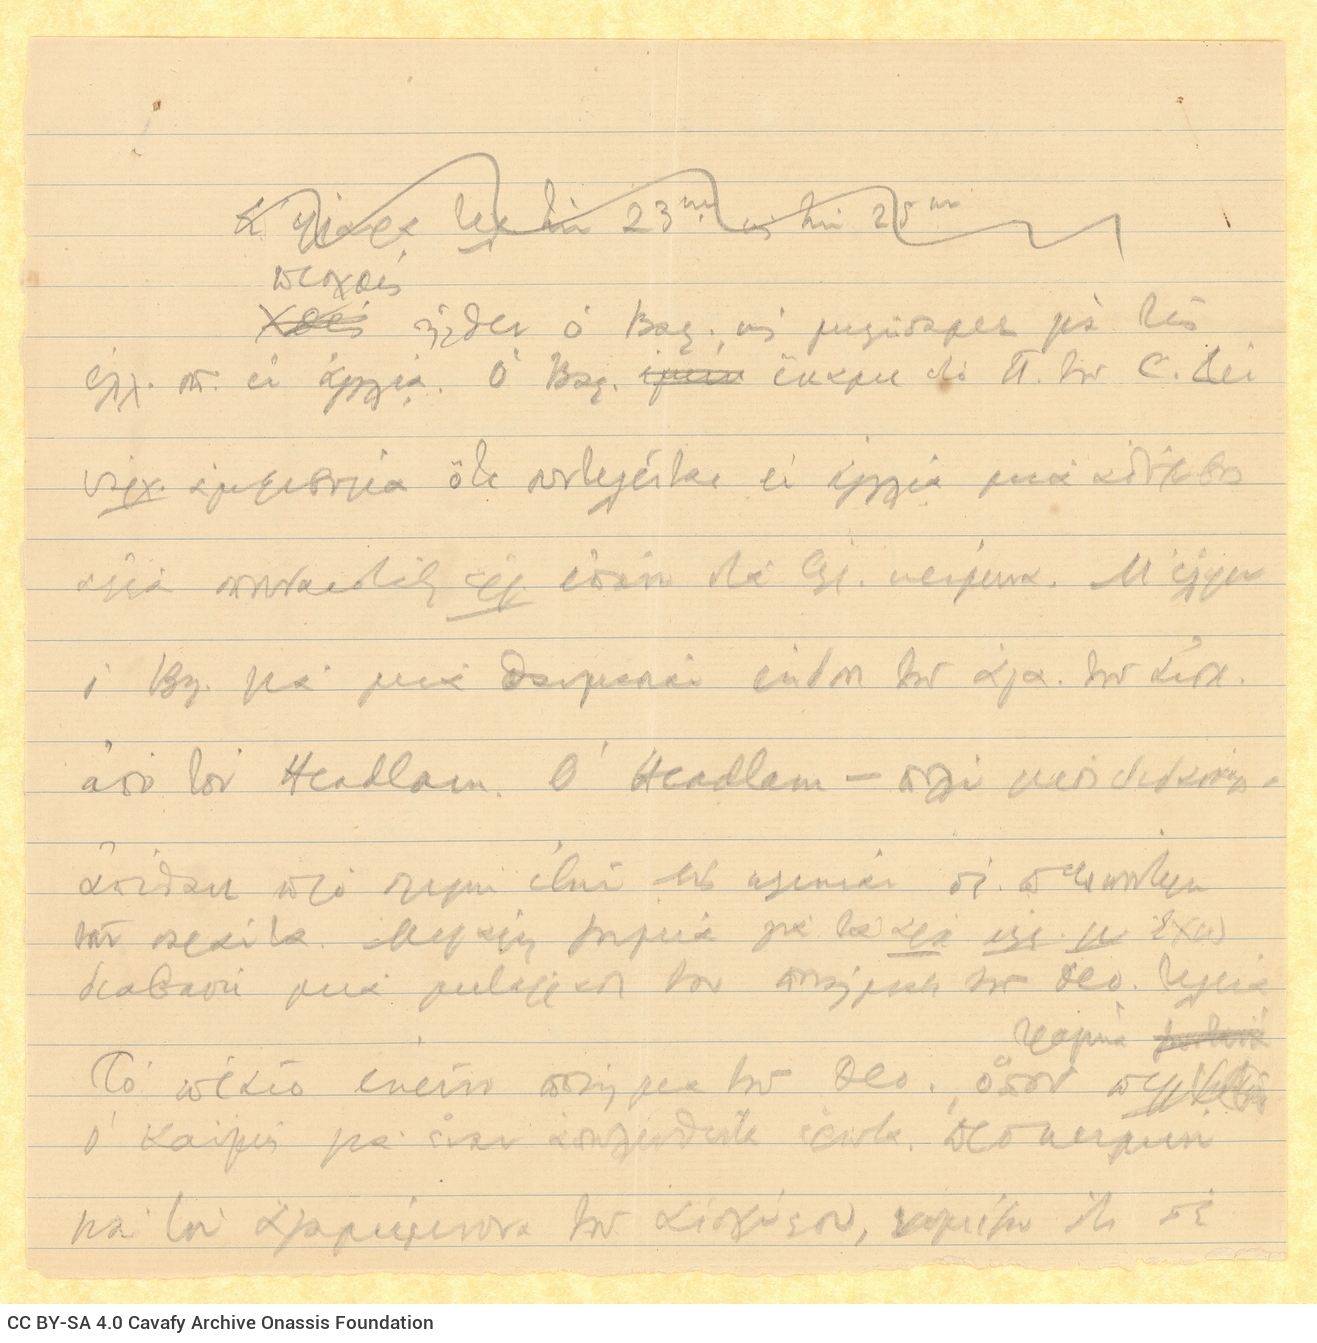 Draft letter by Cavafy to Alekos [Singopoulo] on one side of a piece of paper and on both sides of a ruled sheet. Reference t